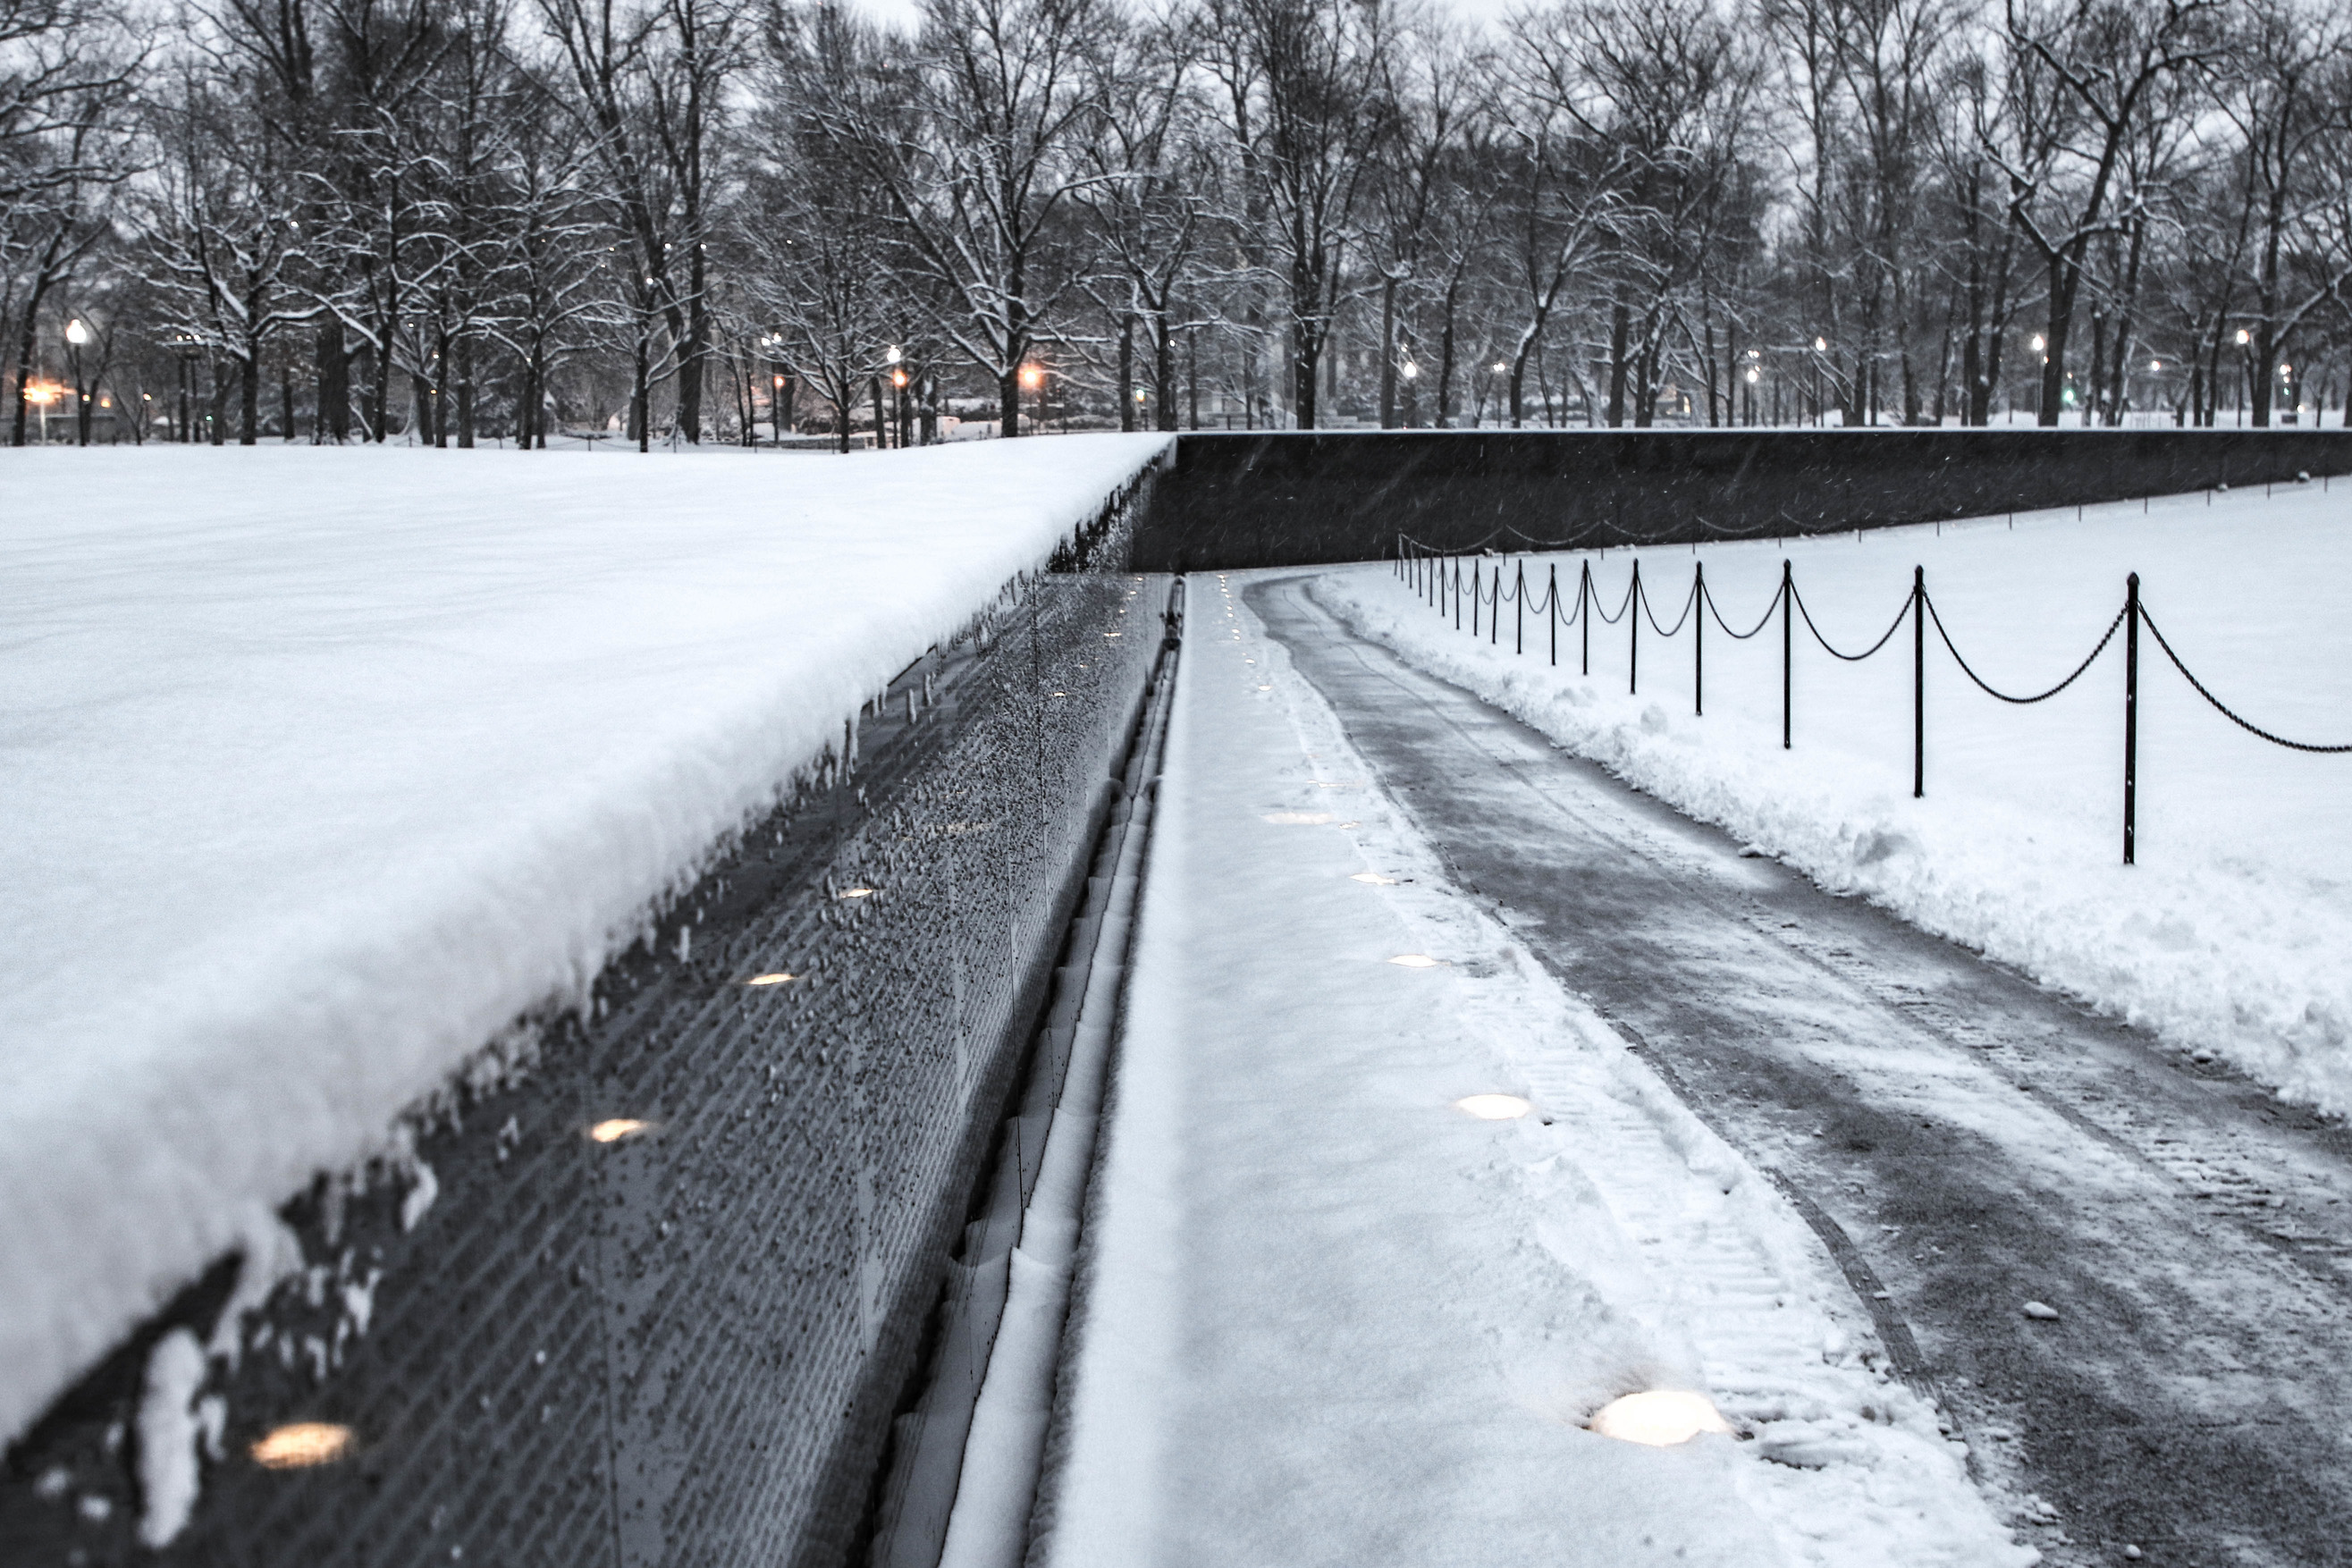 Vietnam Veterans Memorial wall and sidewalk covered with snow